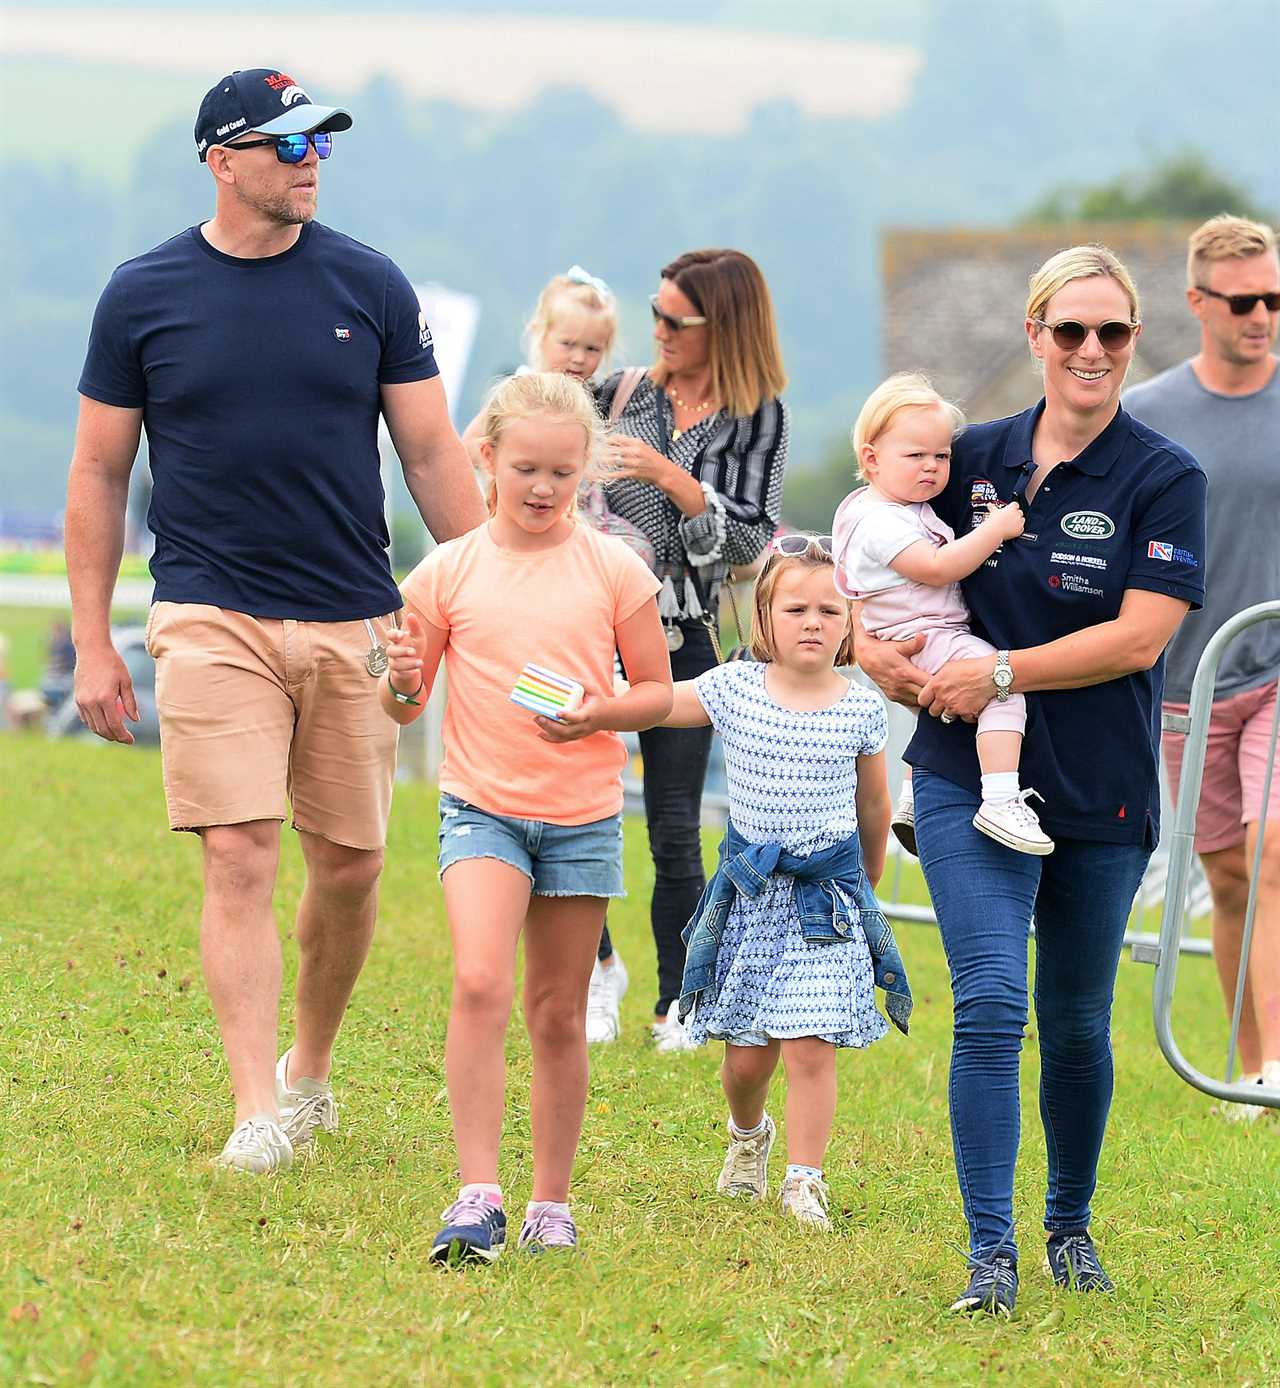 I’m A Celebrity’s Mike Tindall reveals his and wife Zara’s sweet romantic connection to Australia